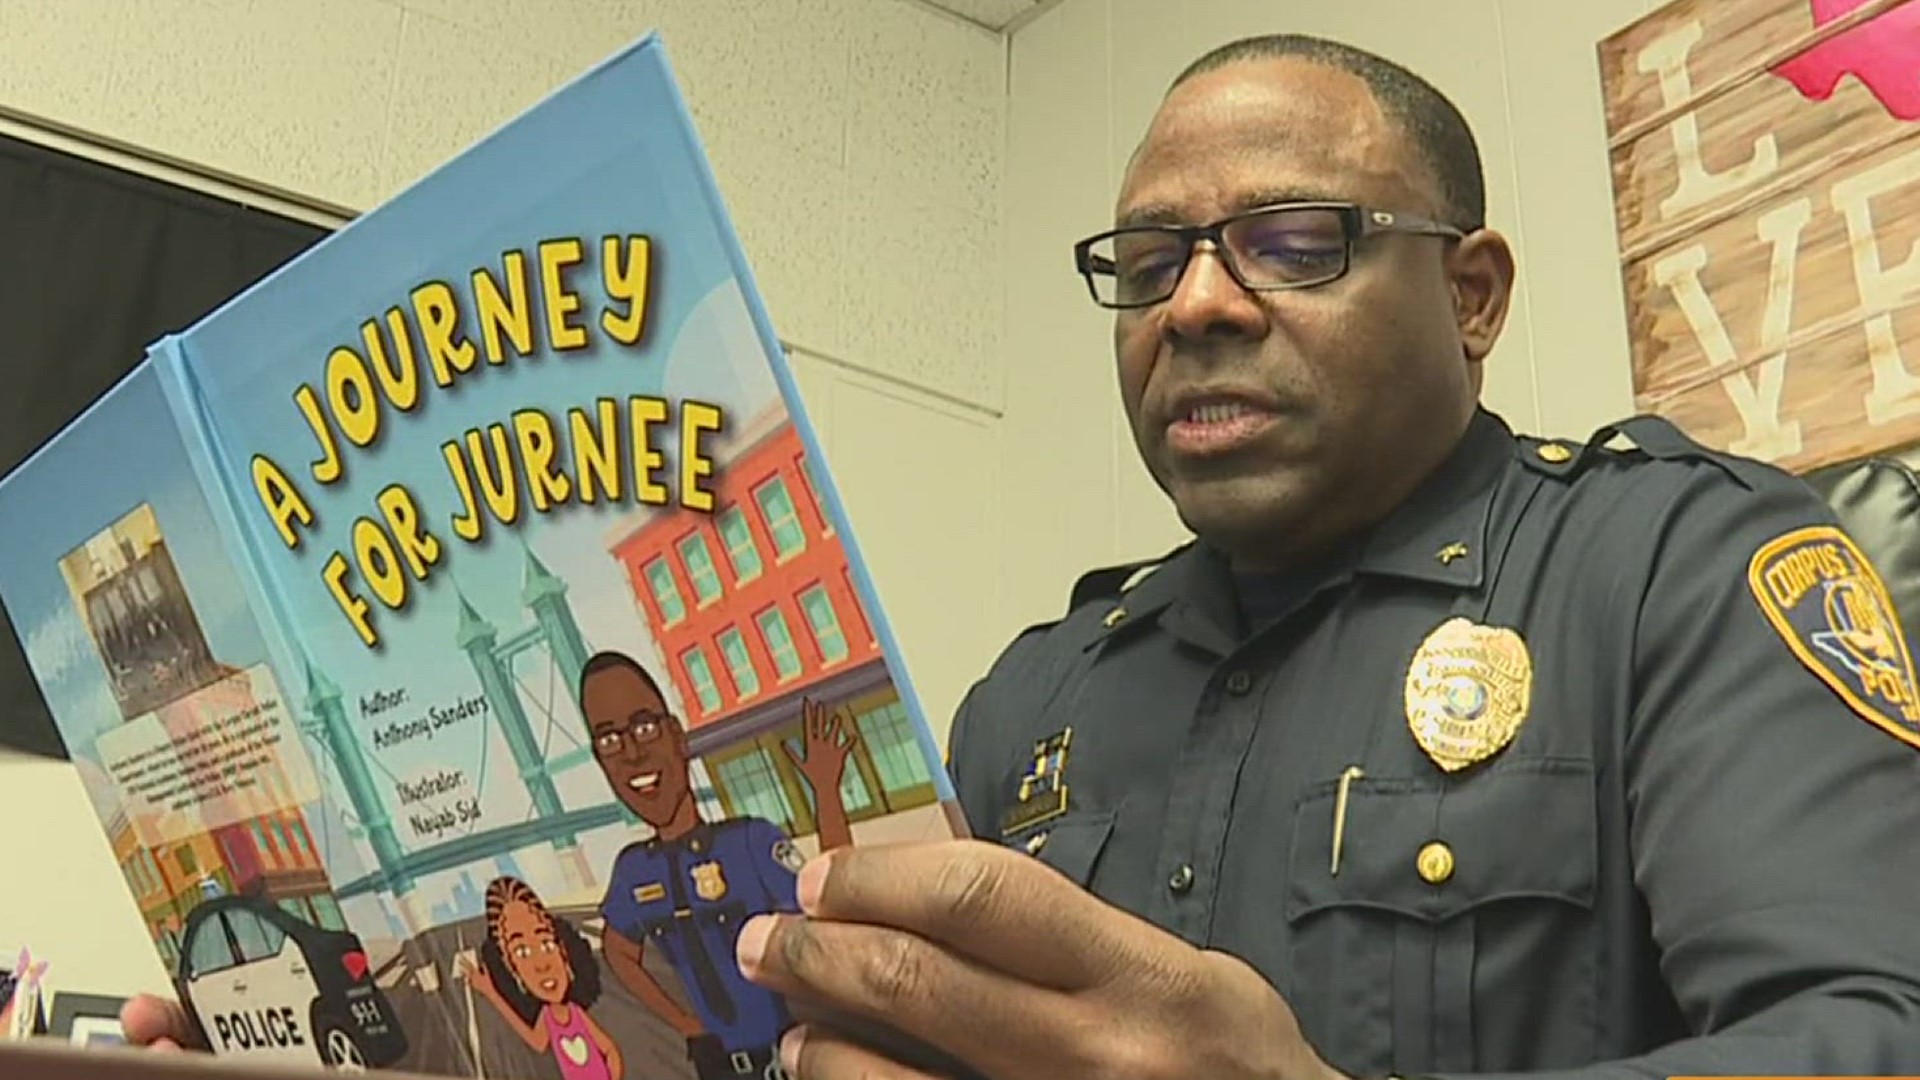 Author, Anthony Sanders says 'A Journey for Jurnee' highlights some of the good things officers do on a daily basis, while also discussing accountability.